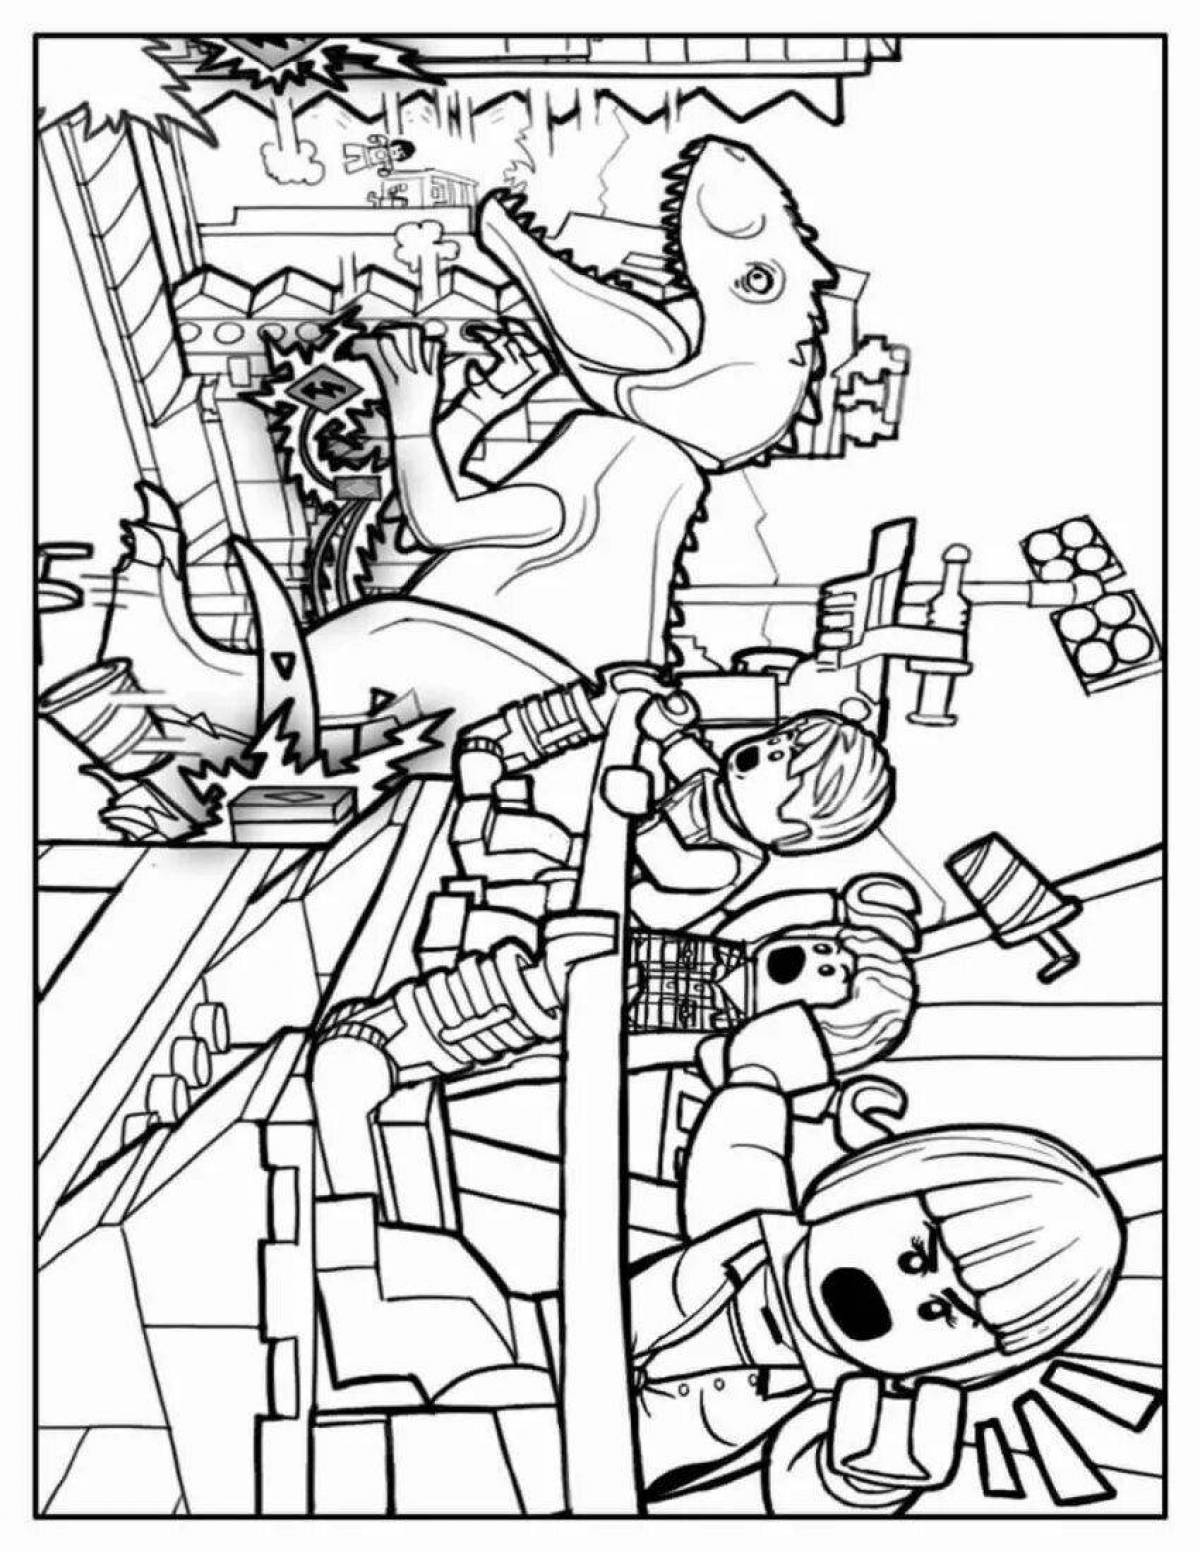 Cute lego jurassic world coloring page